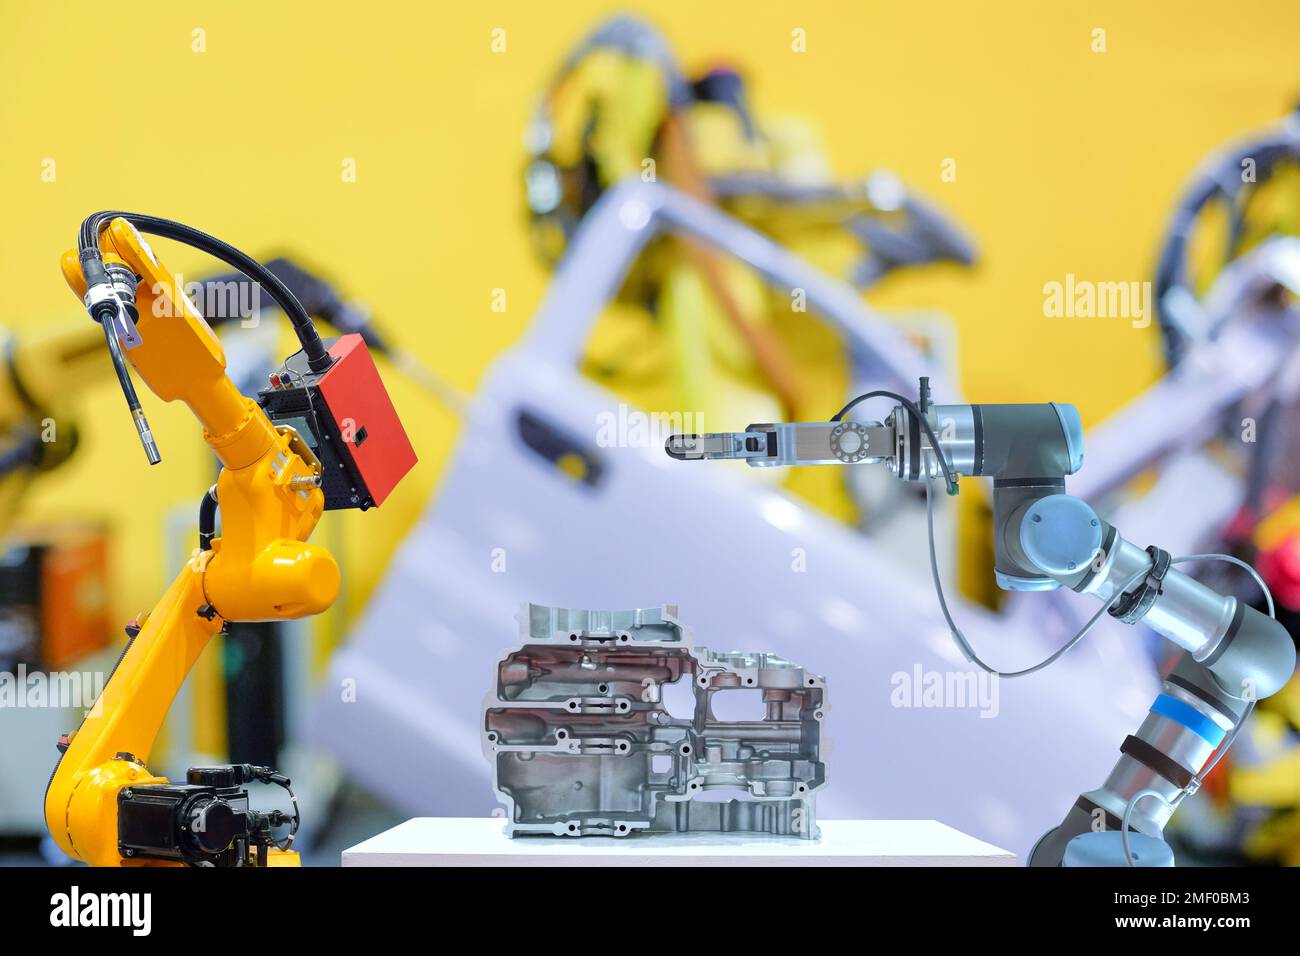 Industrial robotic welding and gripping robot working with metal part on blurred smart car factory background Stock Photo